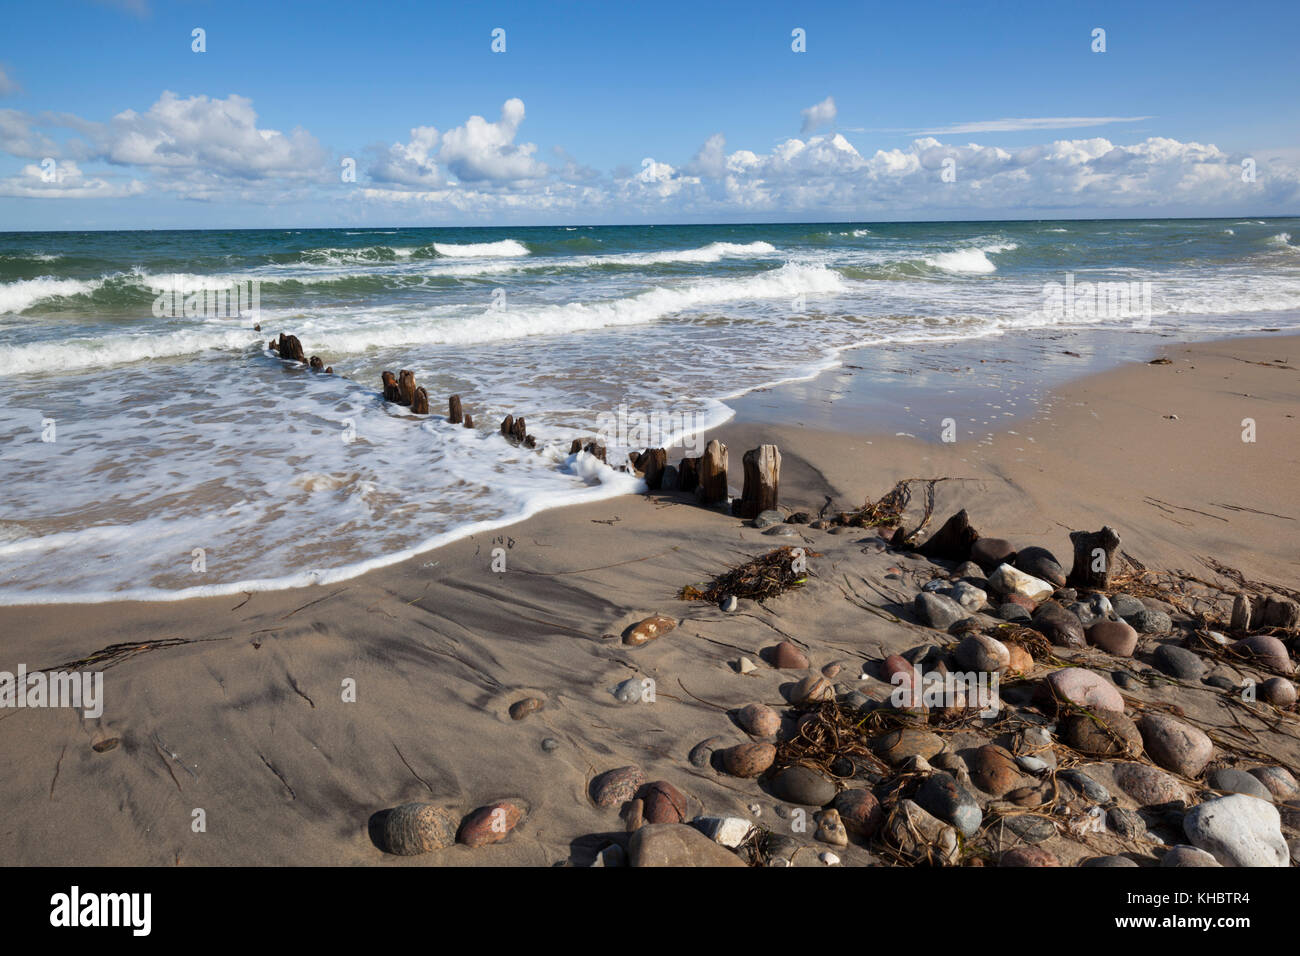 Old wooden posts and pebbles on sand beach with breaking waves and cumulus clouds, Rageleje, Kattegat Coast, Zealand, Denmark, Europe Stock Photo